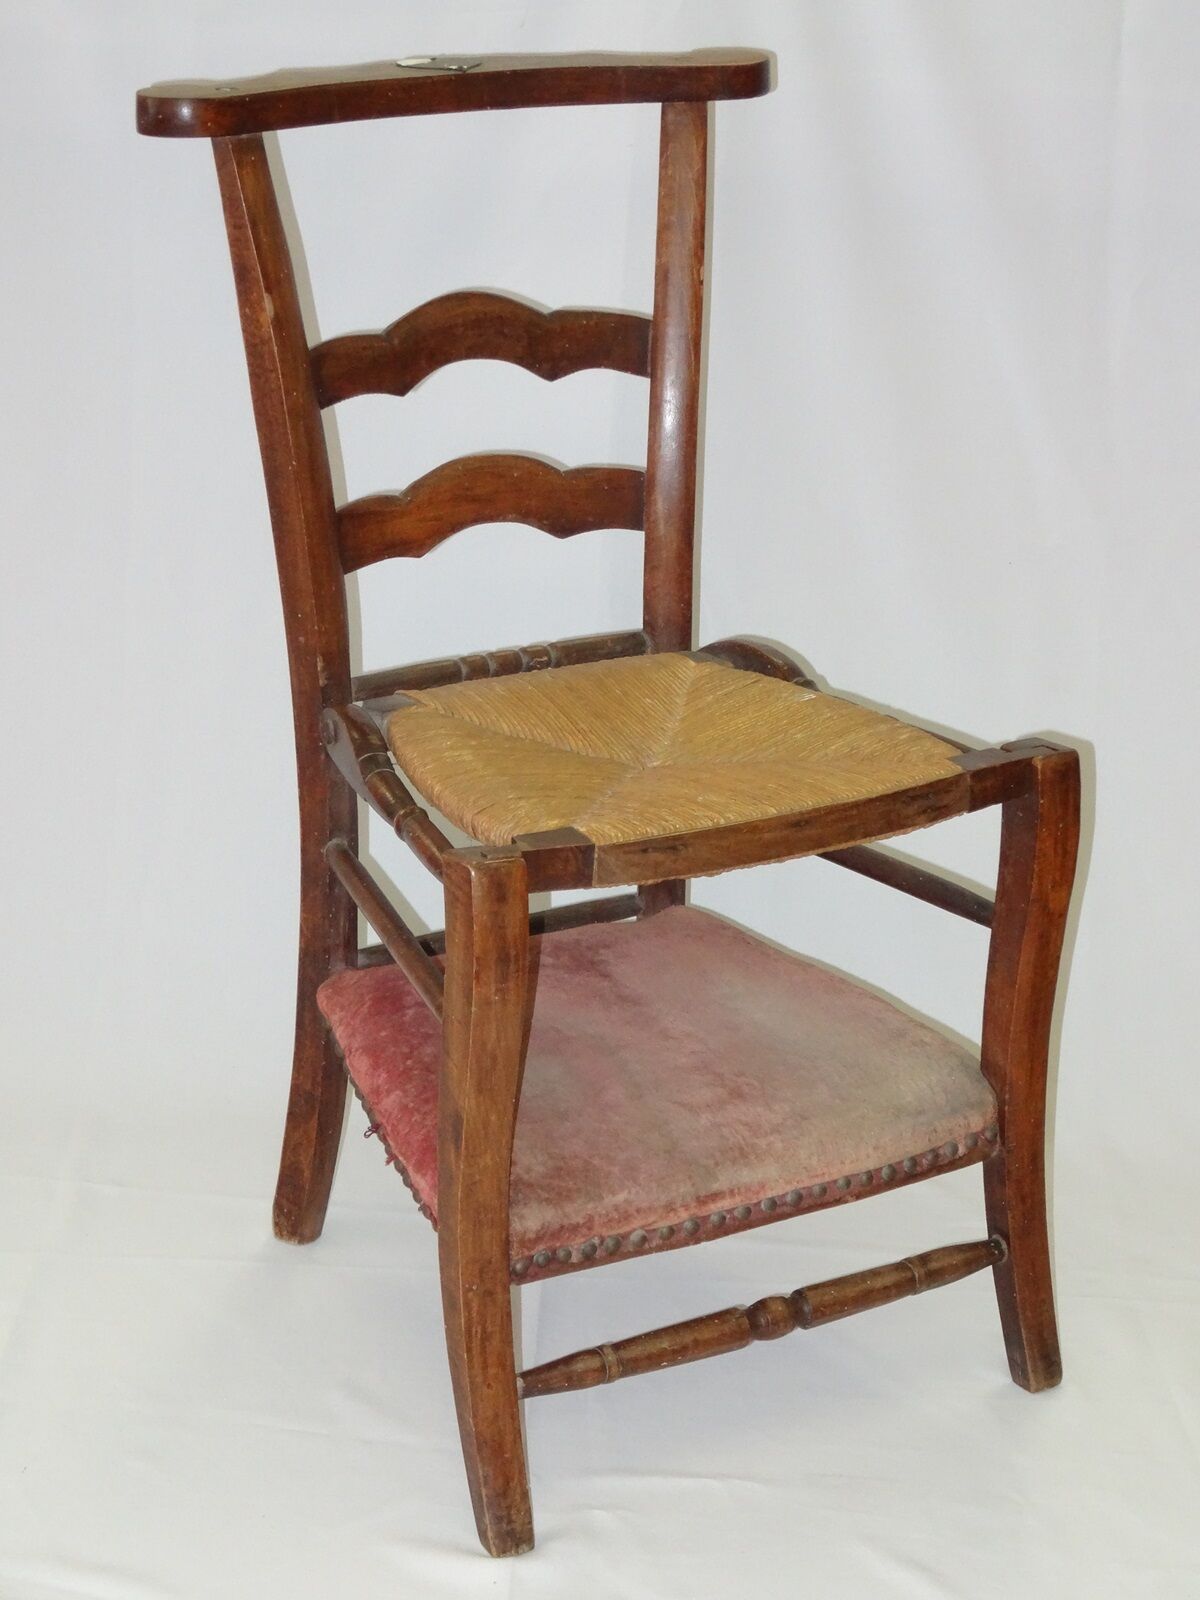 ANTIQUE FRENCH 19 c COUNTRY FRENCH PRIE DIEU KNEELER CHAIR w/ VELVET & RUSH SEAT